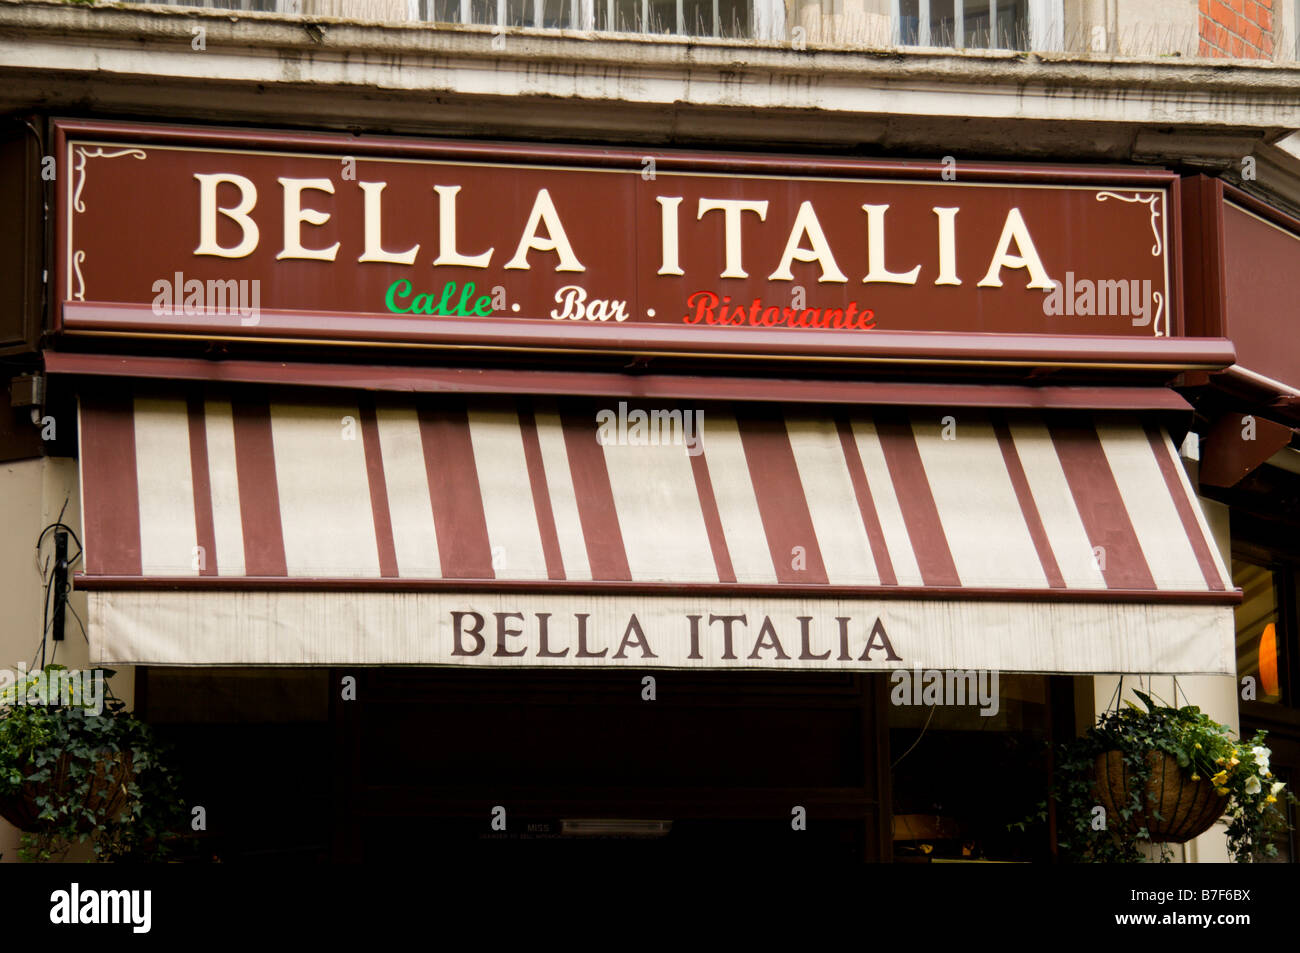 The store front of a Bella Italia restaurant in Oxford, England. Jan 2009 Stock Photo